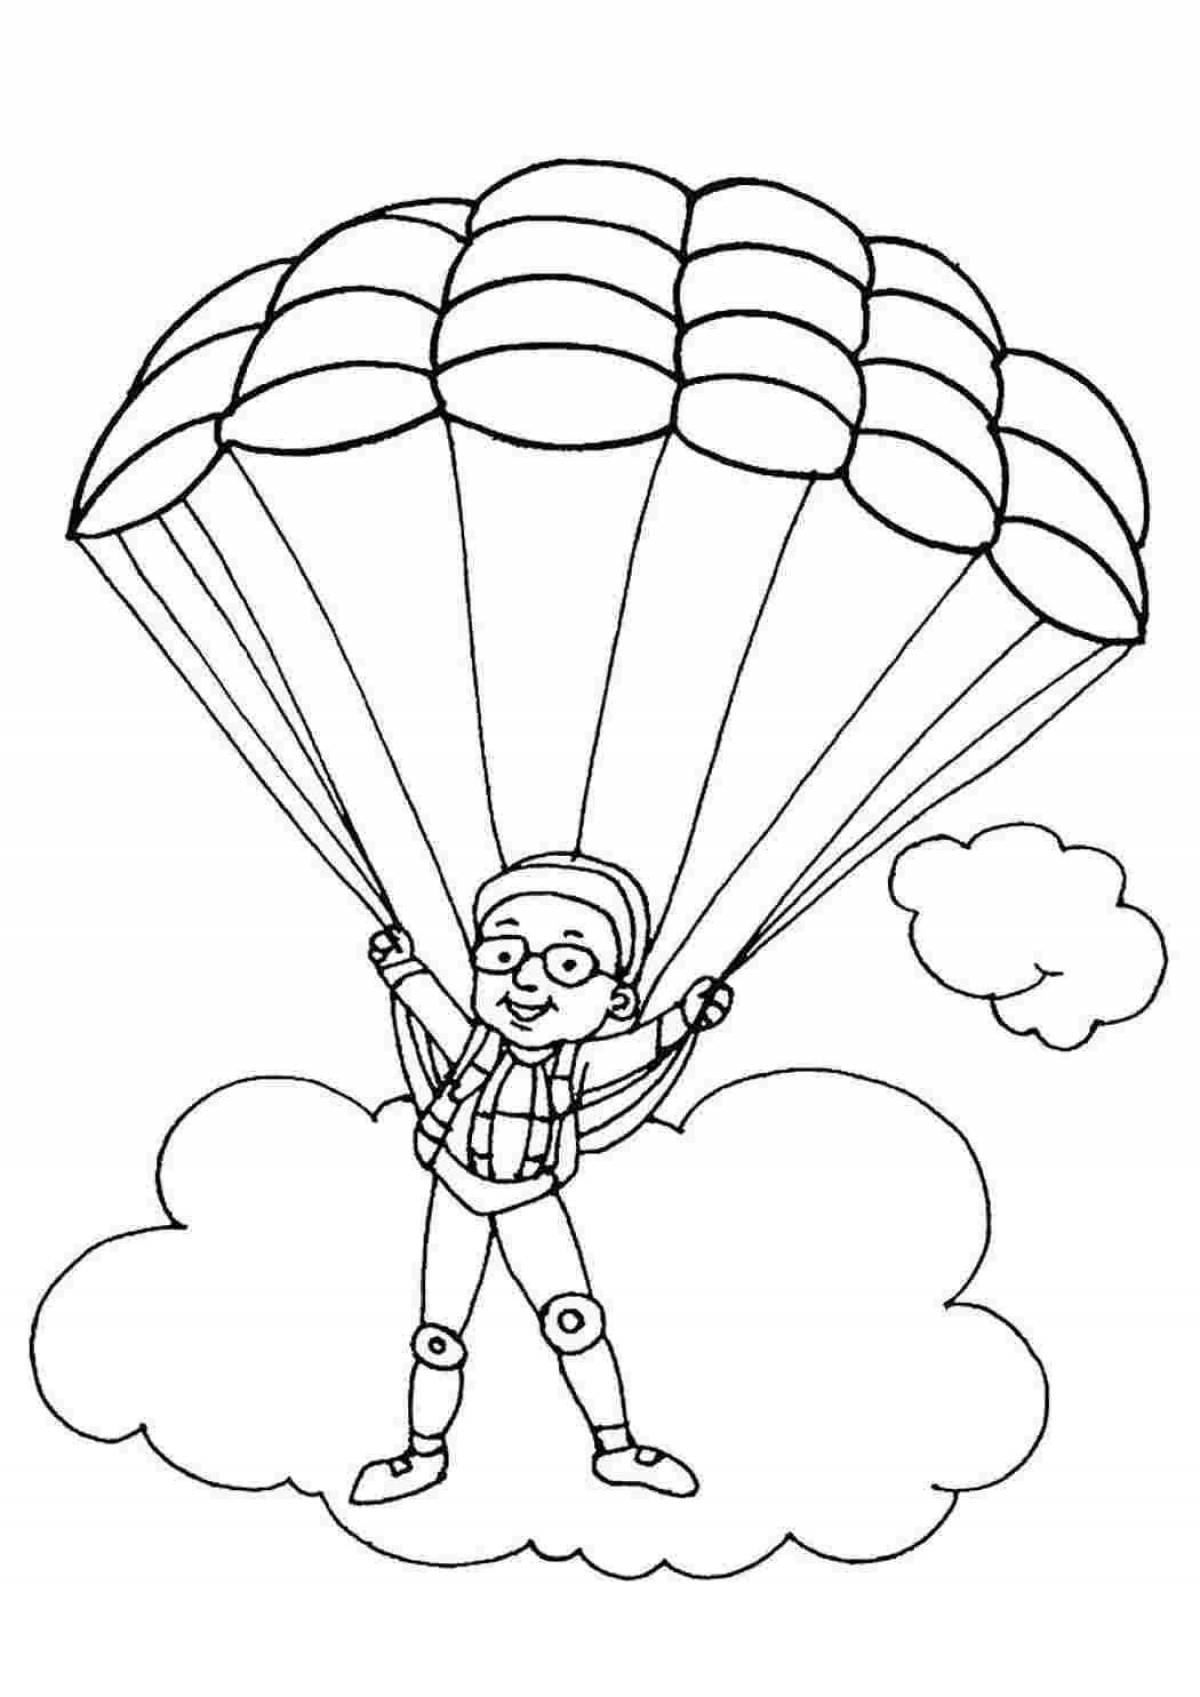 Vibrant skydiver coloring page